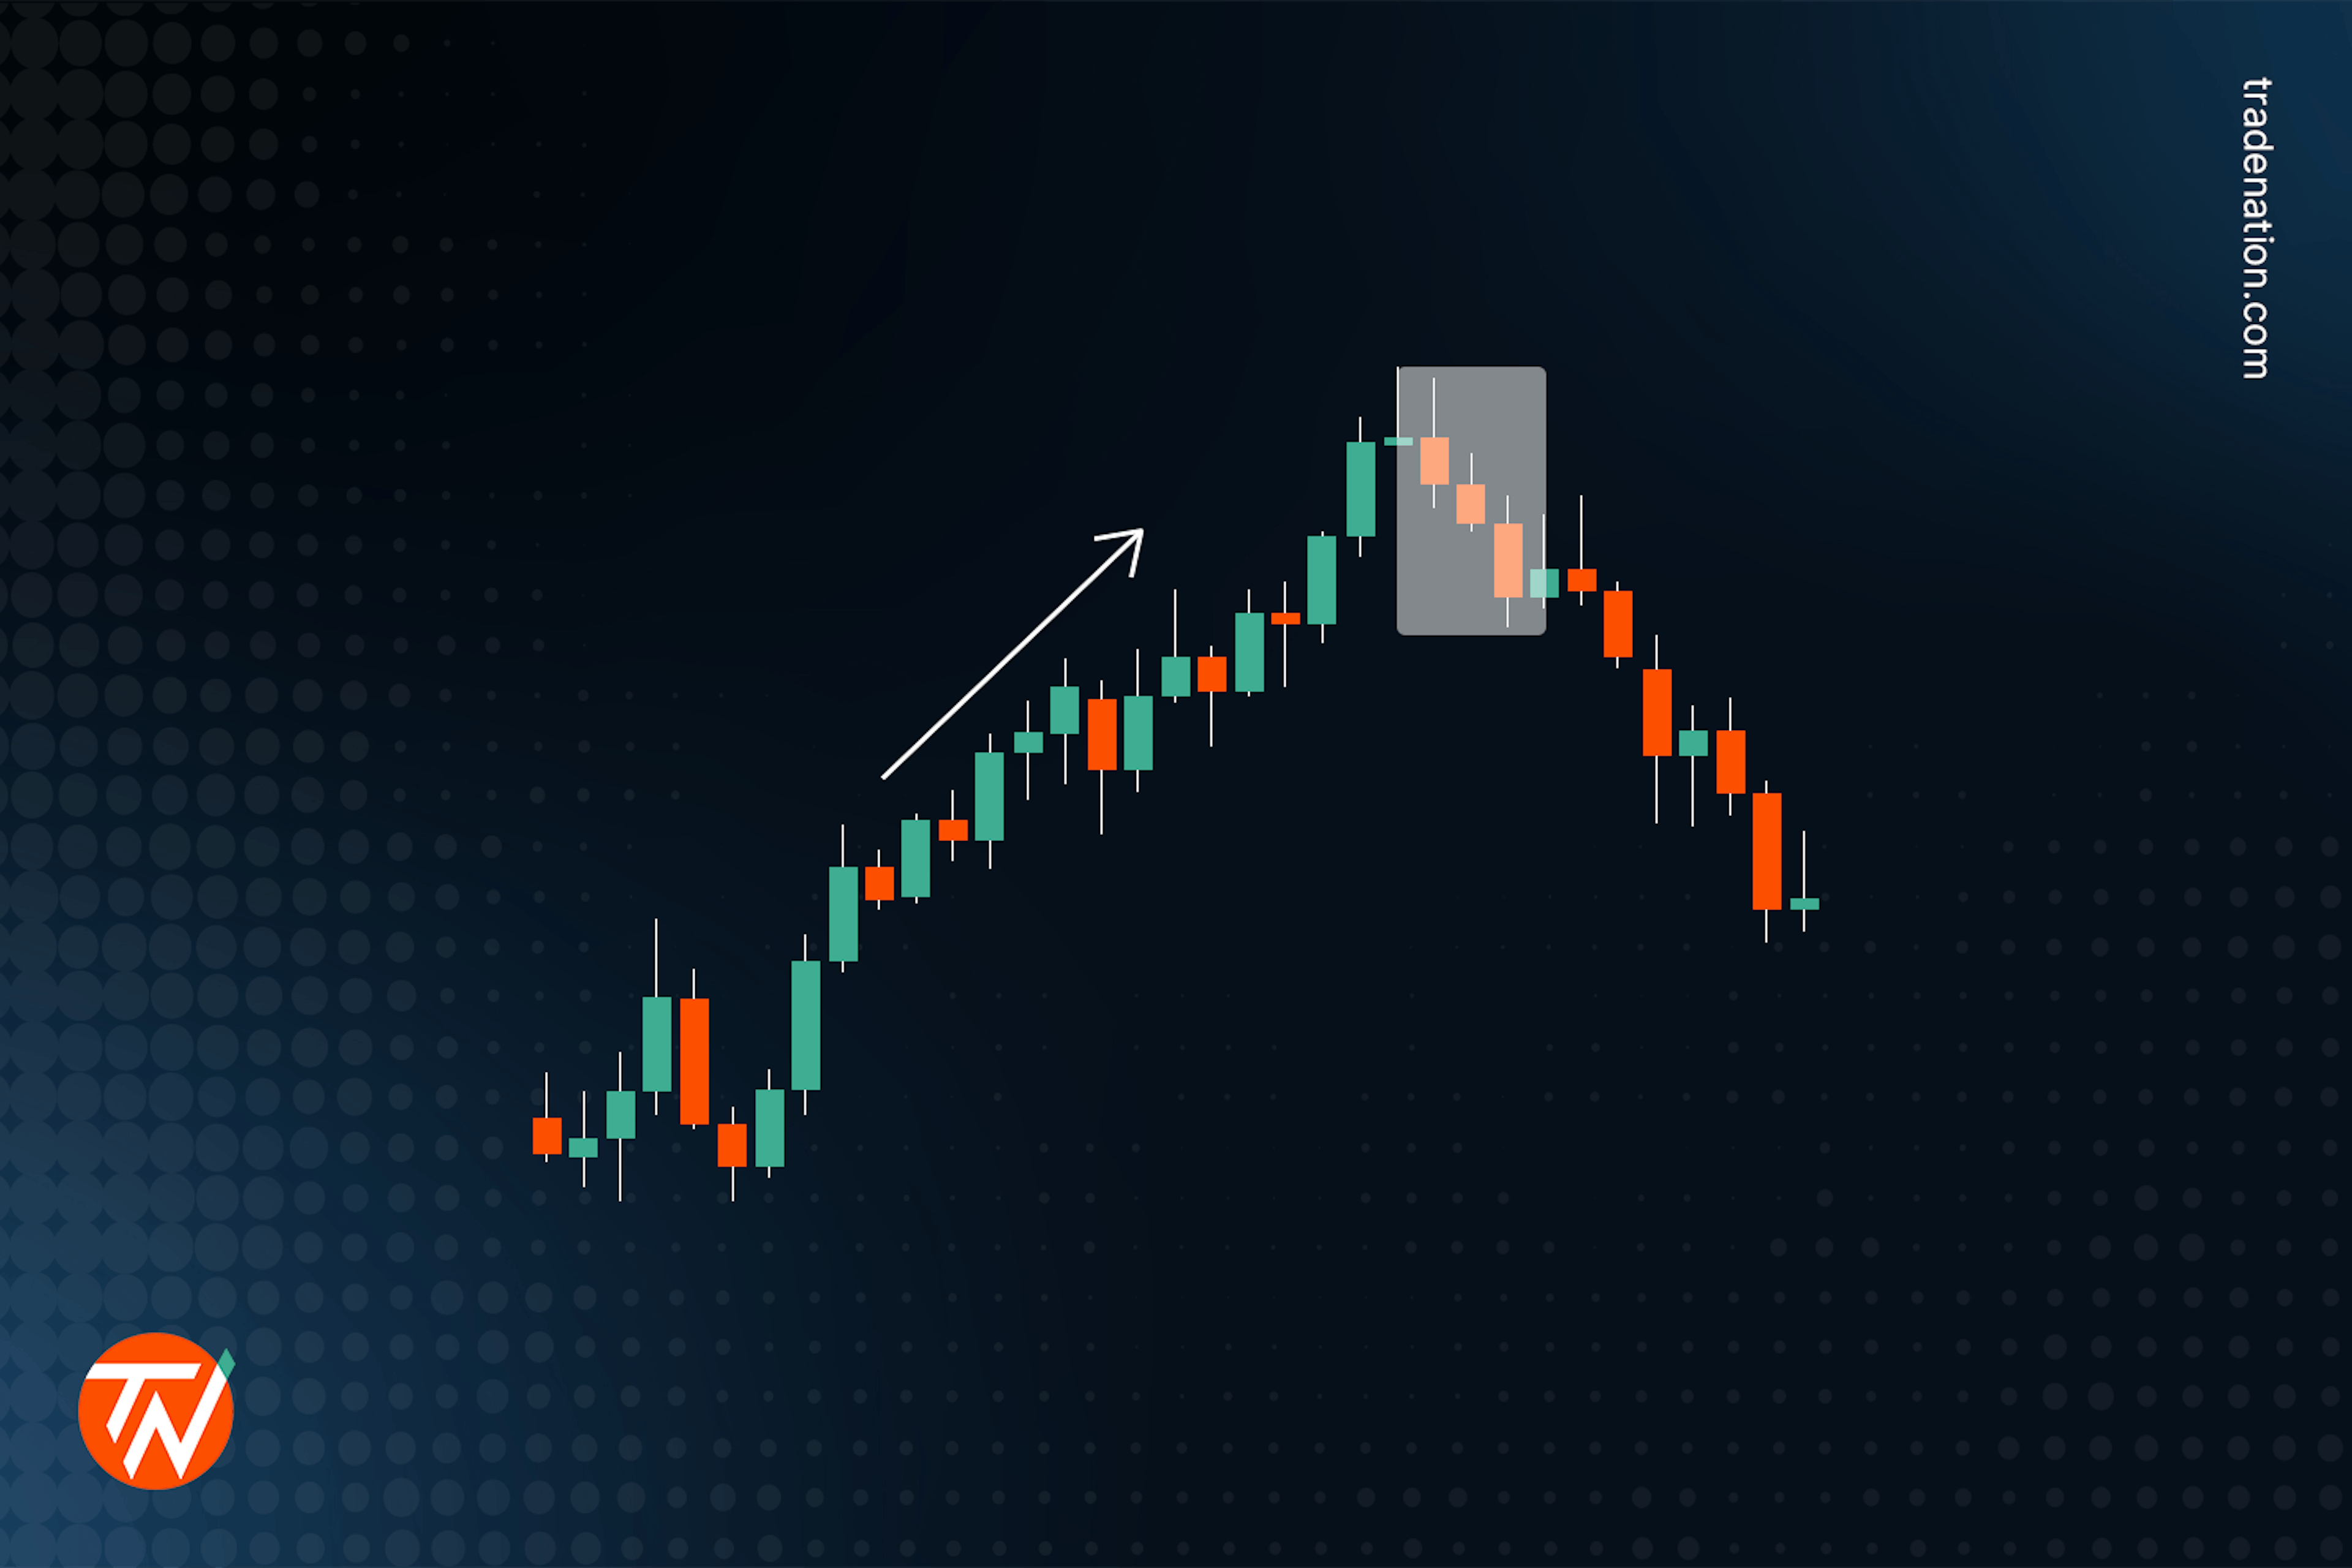 Three black crows candlestick pattern demonstrated